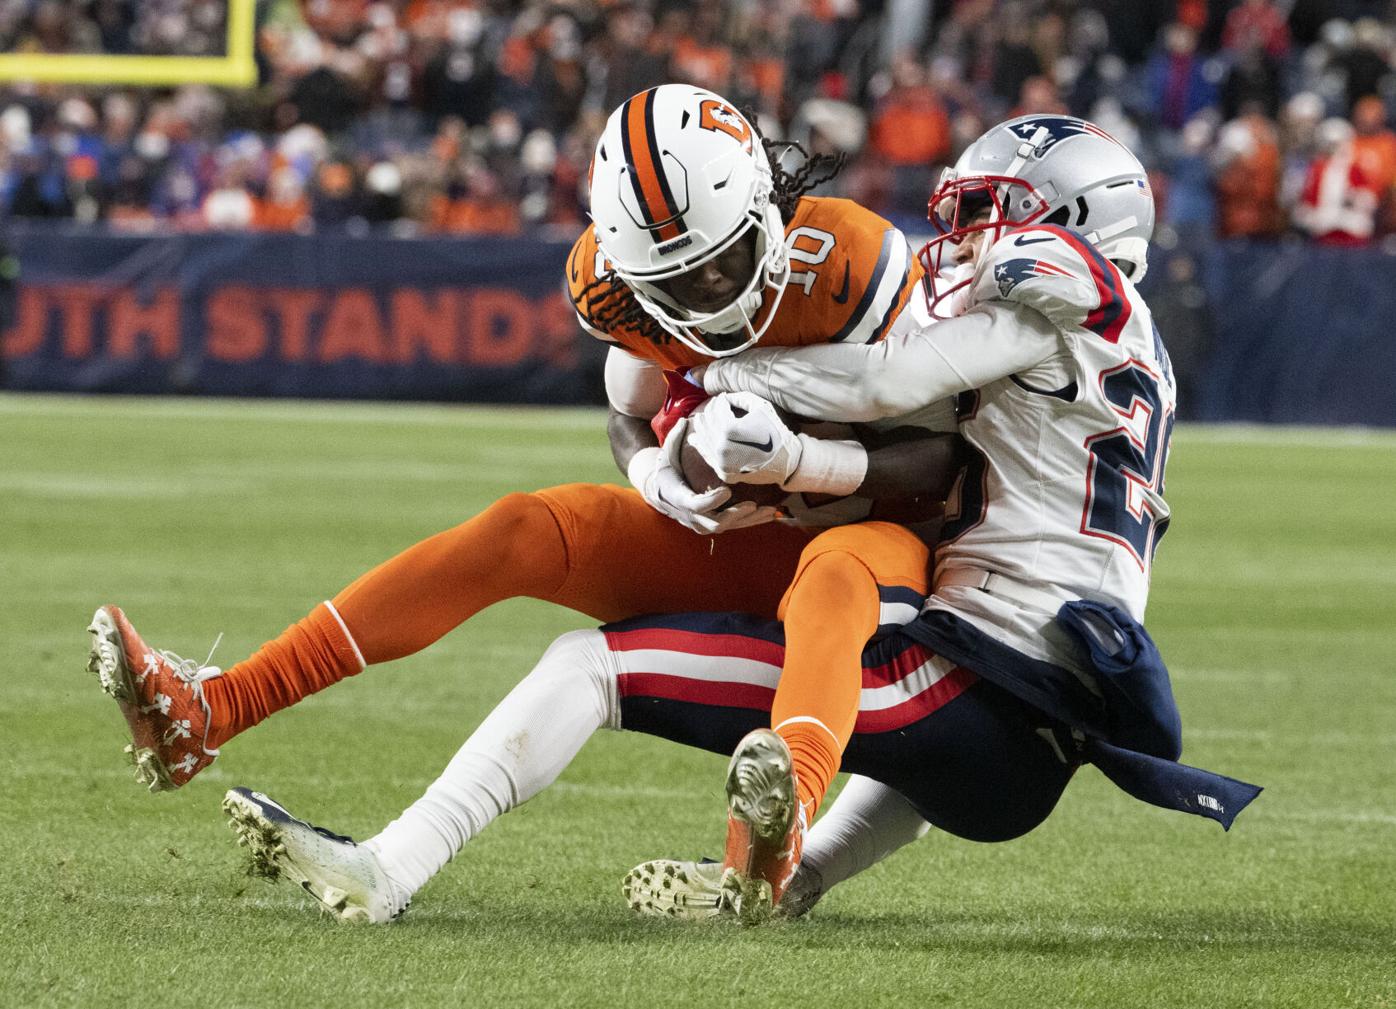  Courtland Sutton Stays Put Denver Broncos Reject Trade Offers Amid Offseason Changes.